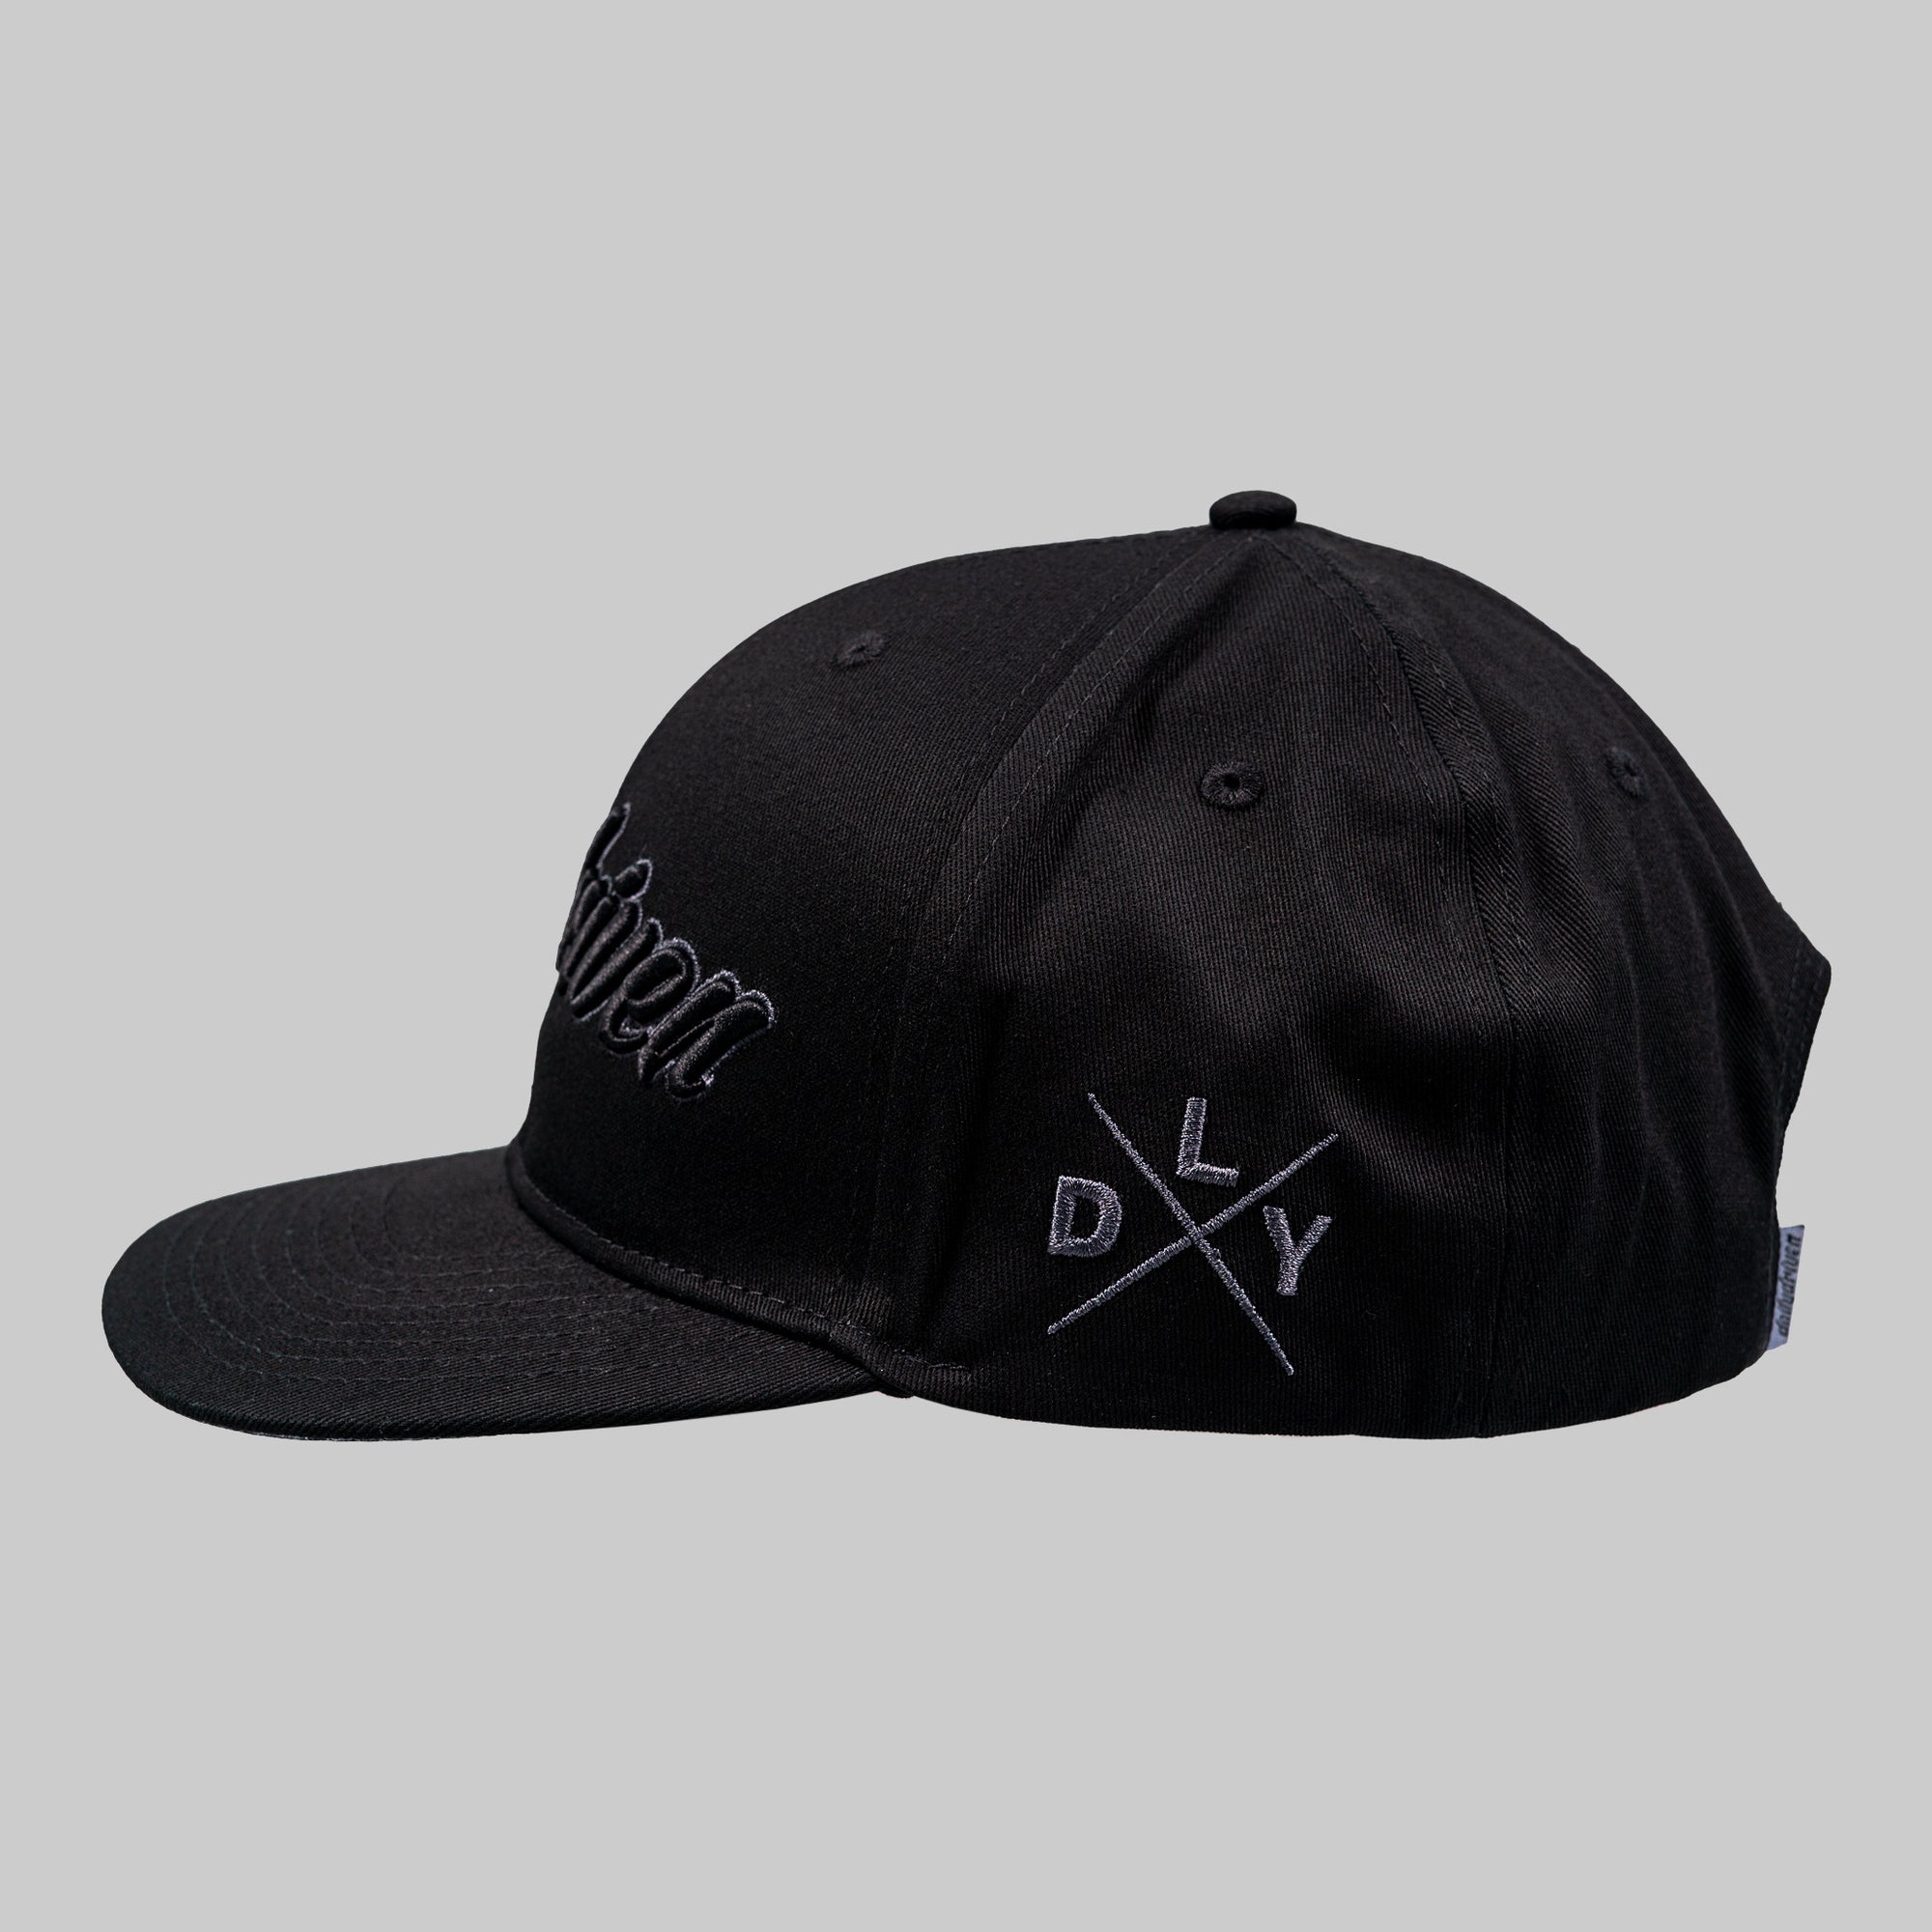 DailyDriven Relaunch Blacked Out Snapback Hat